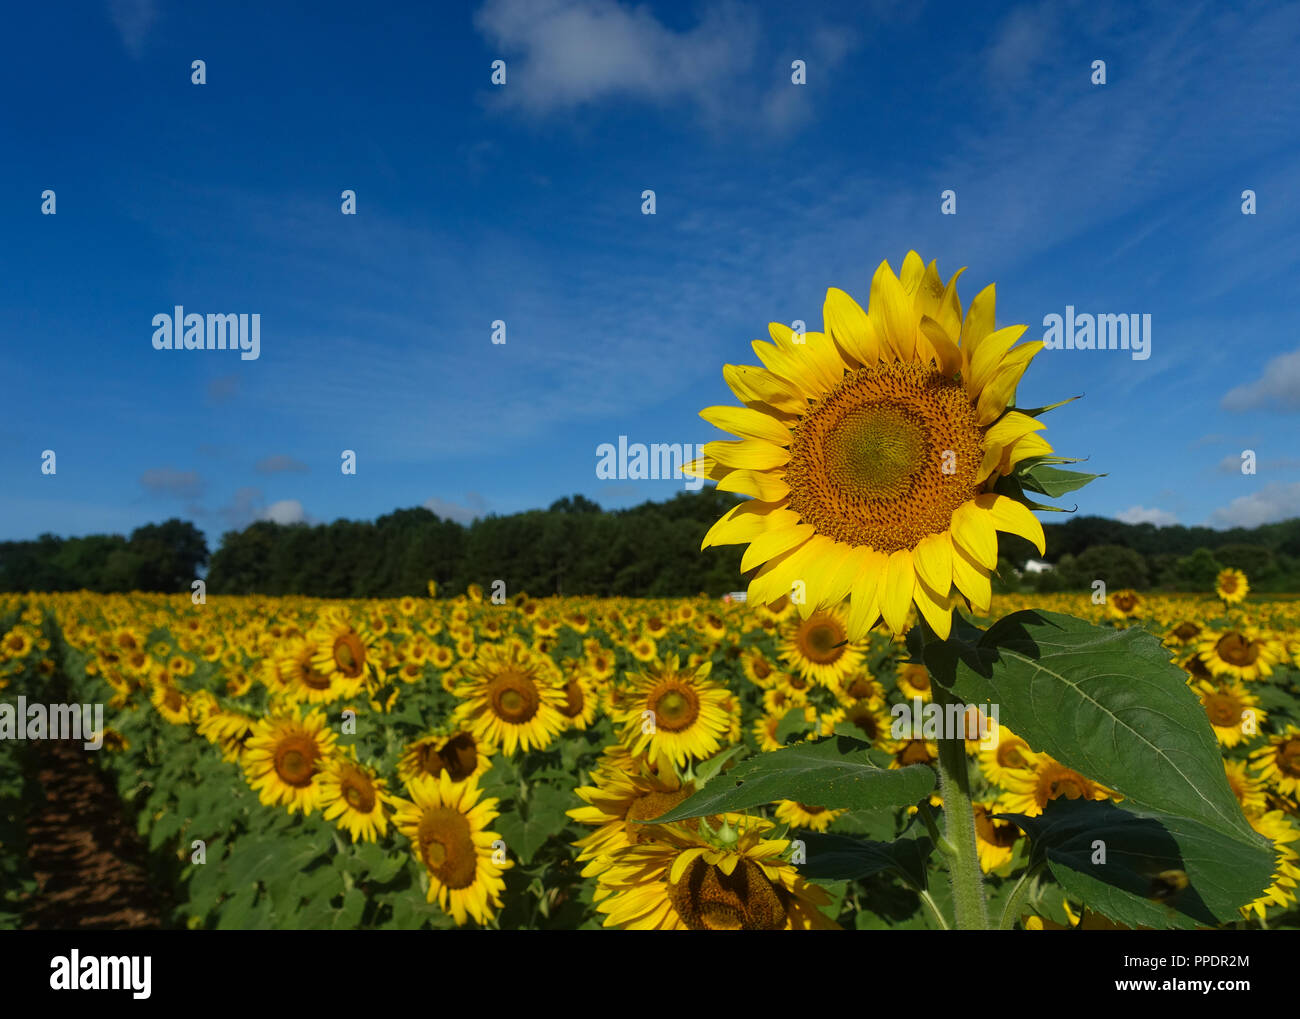 A  bright bold sunflower rises above other flowers in a field in summer underneath a blue sky Stock Photo